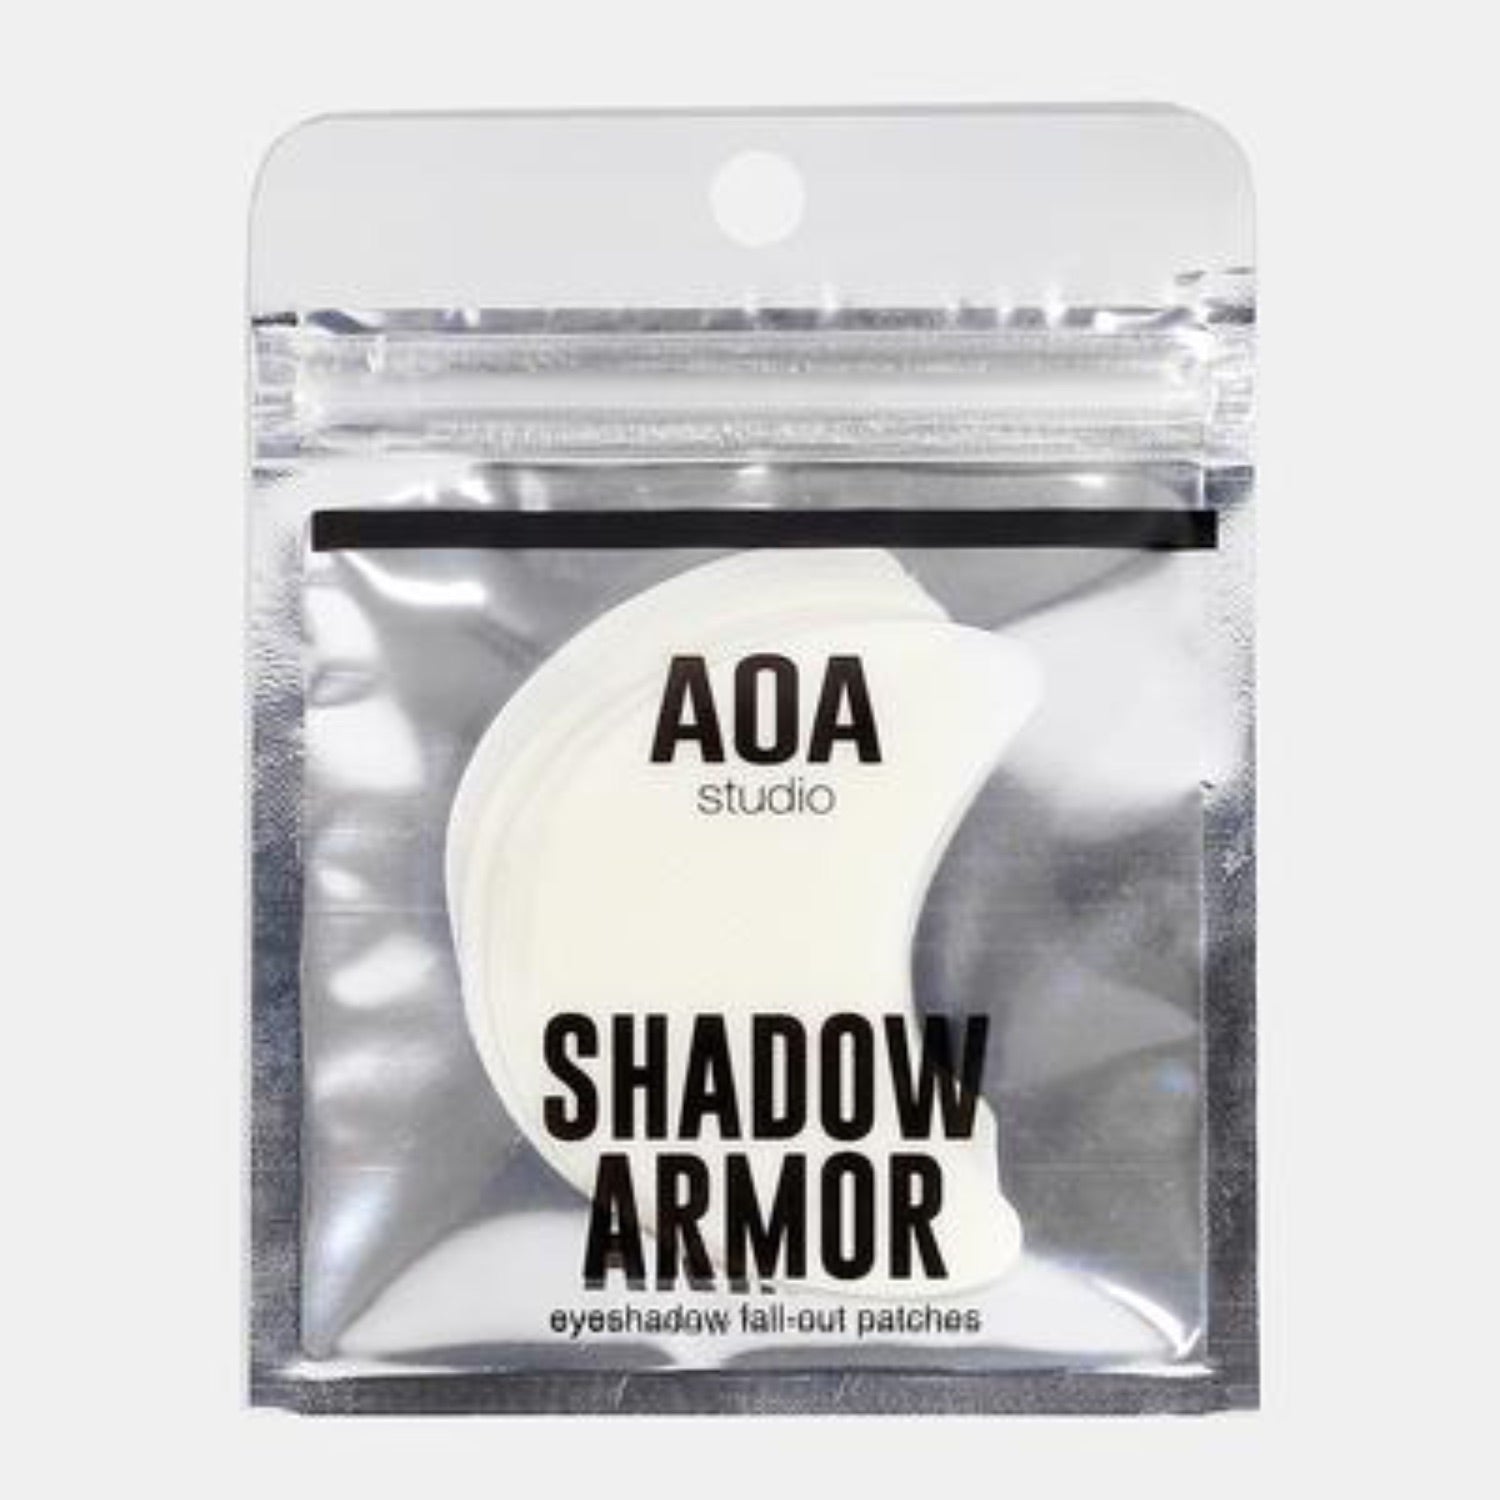 SHADOW ARMOR PATCHES